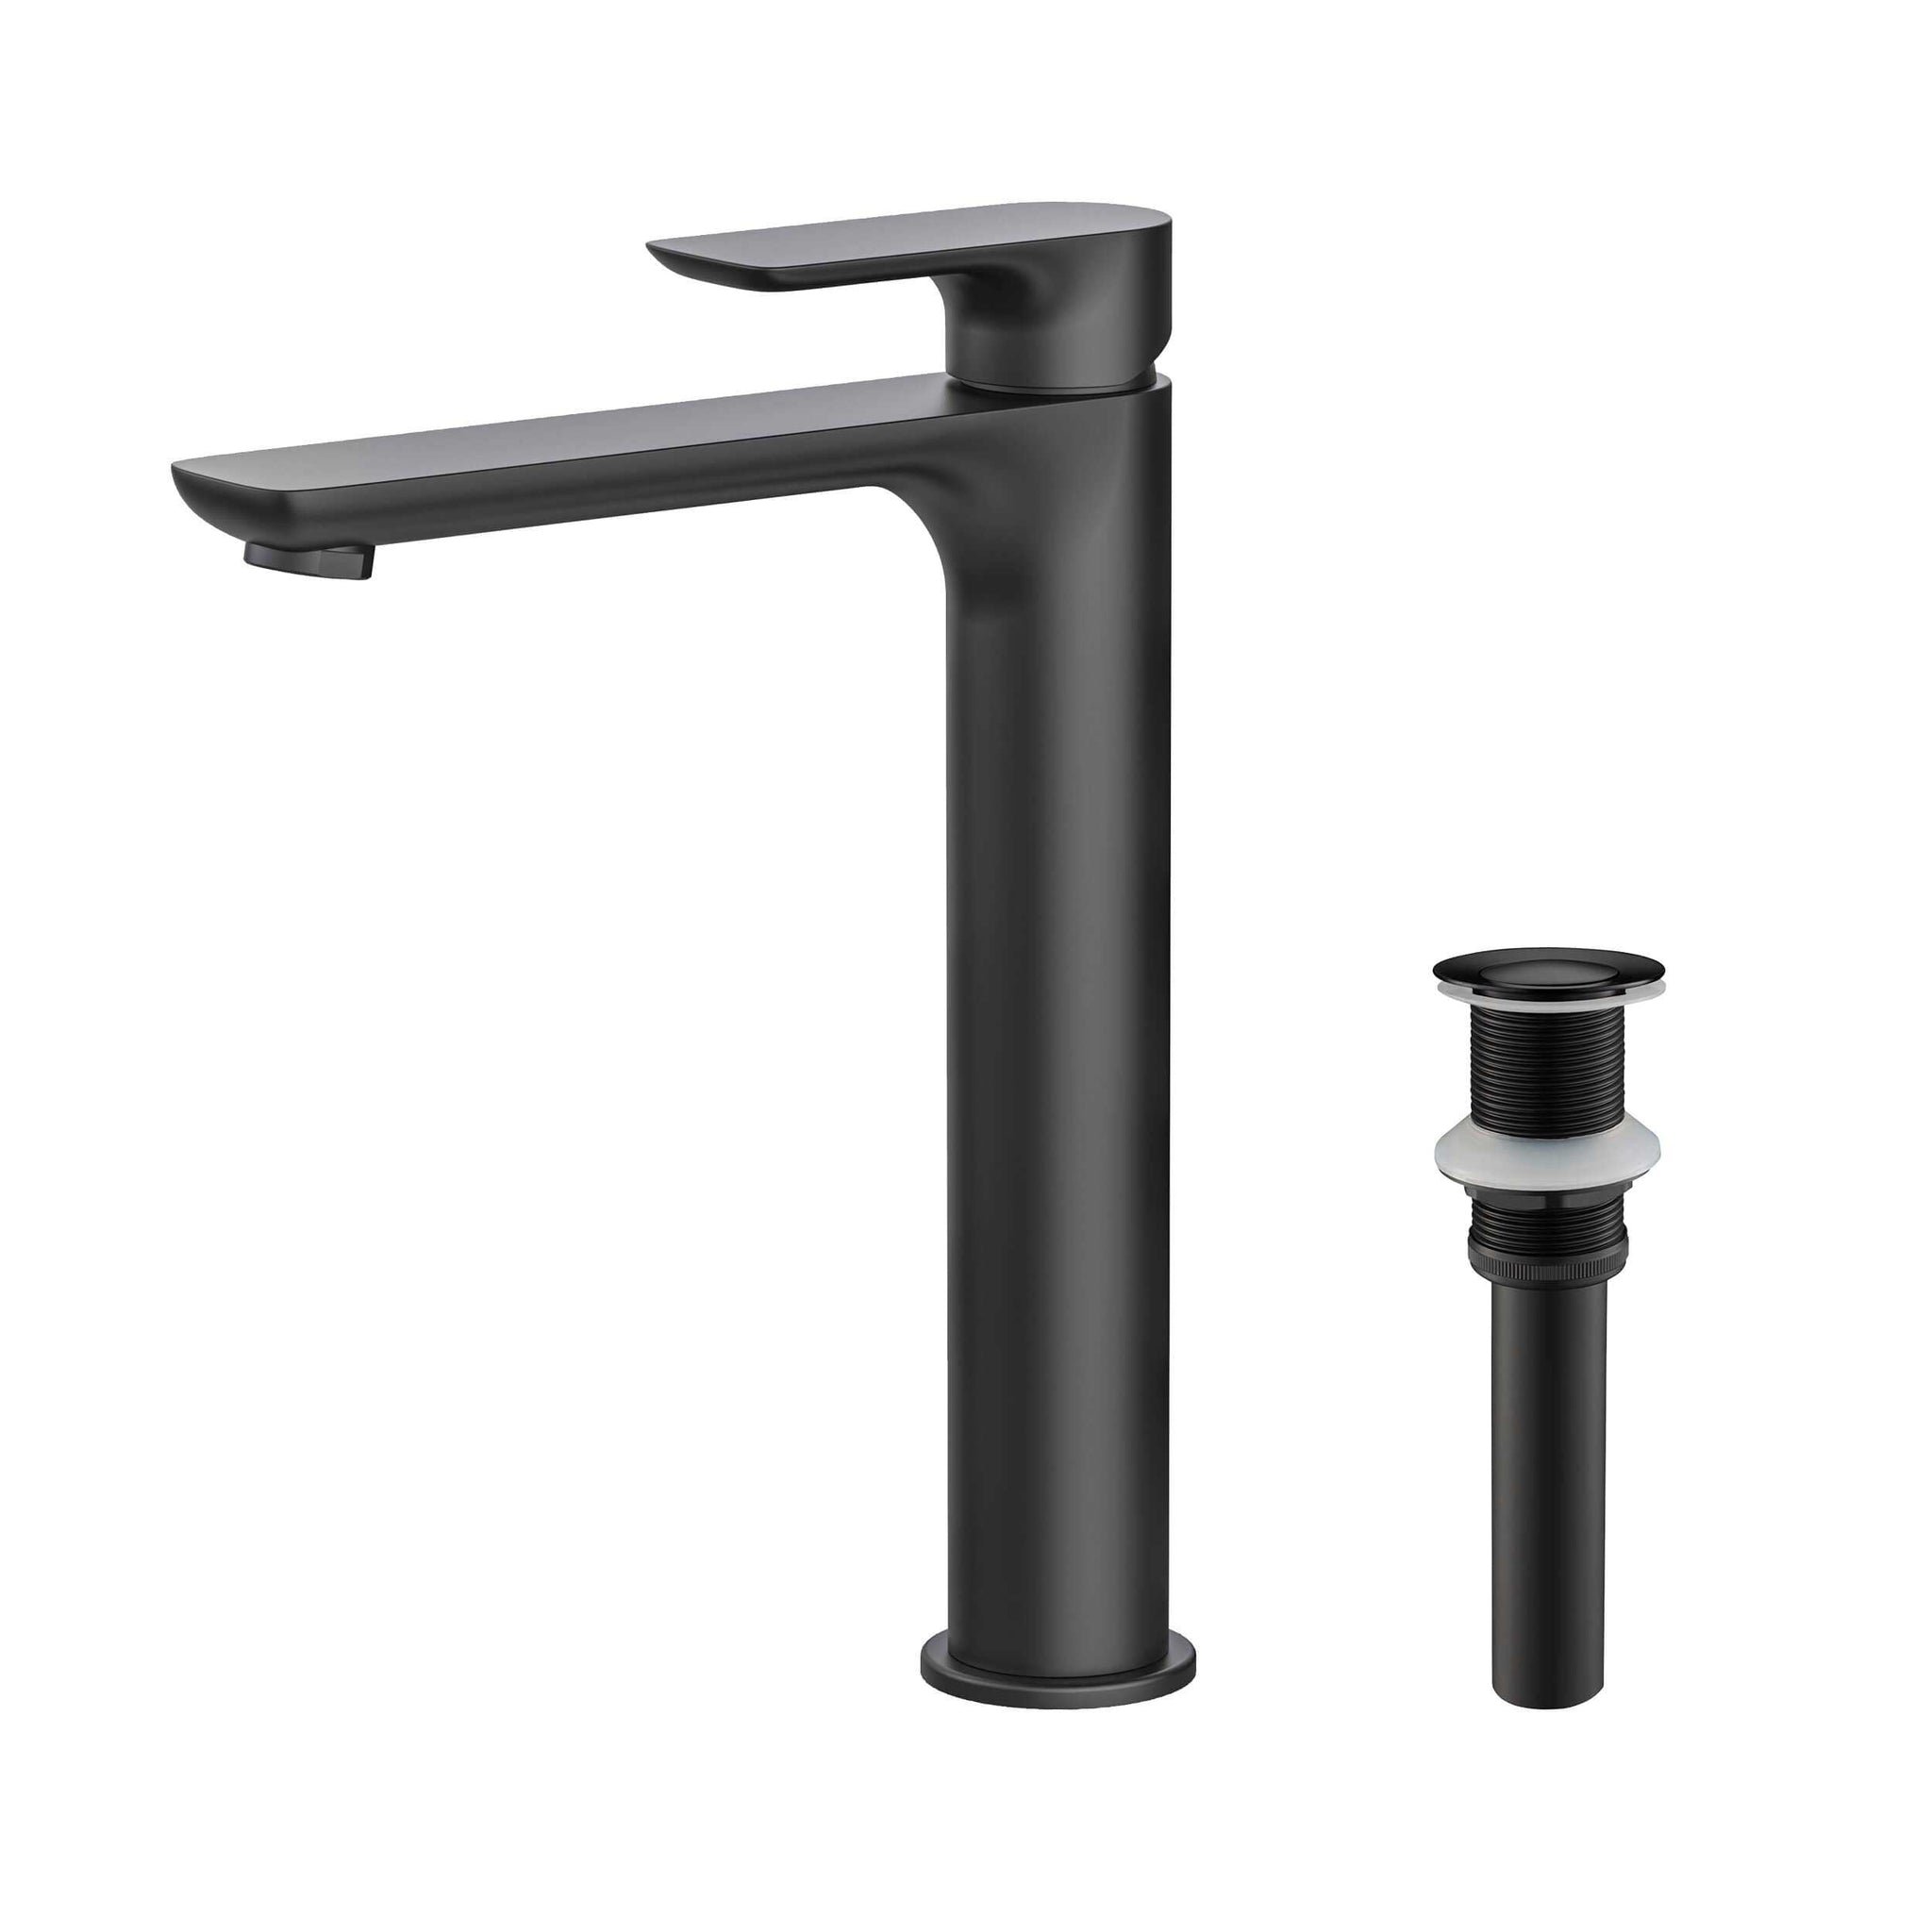 KIBI, KIBI Tender-T Single Handle Matte Black Solid Brass Bathroom Vessel Sink Faucet With Pop-Up Drain Stopper Small Cover Without Overflow